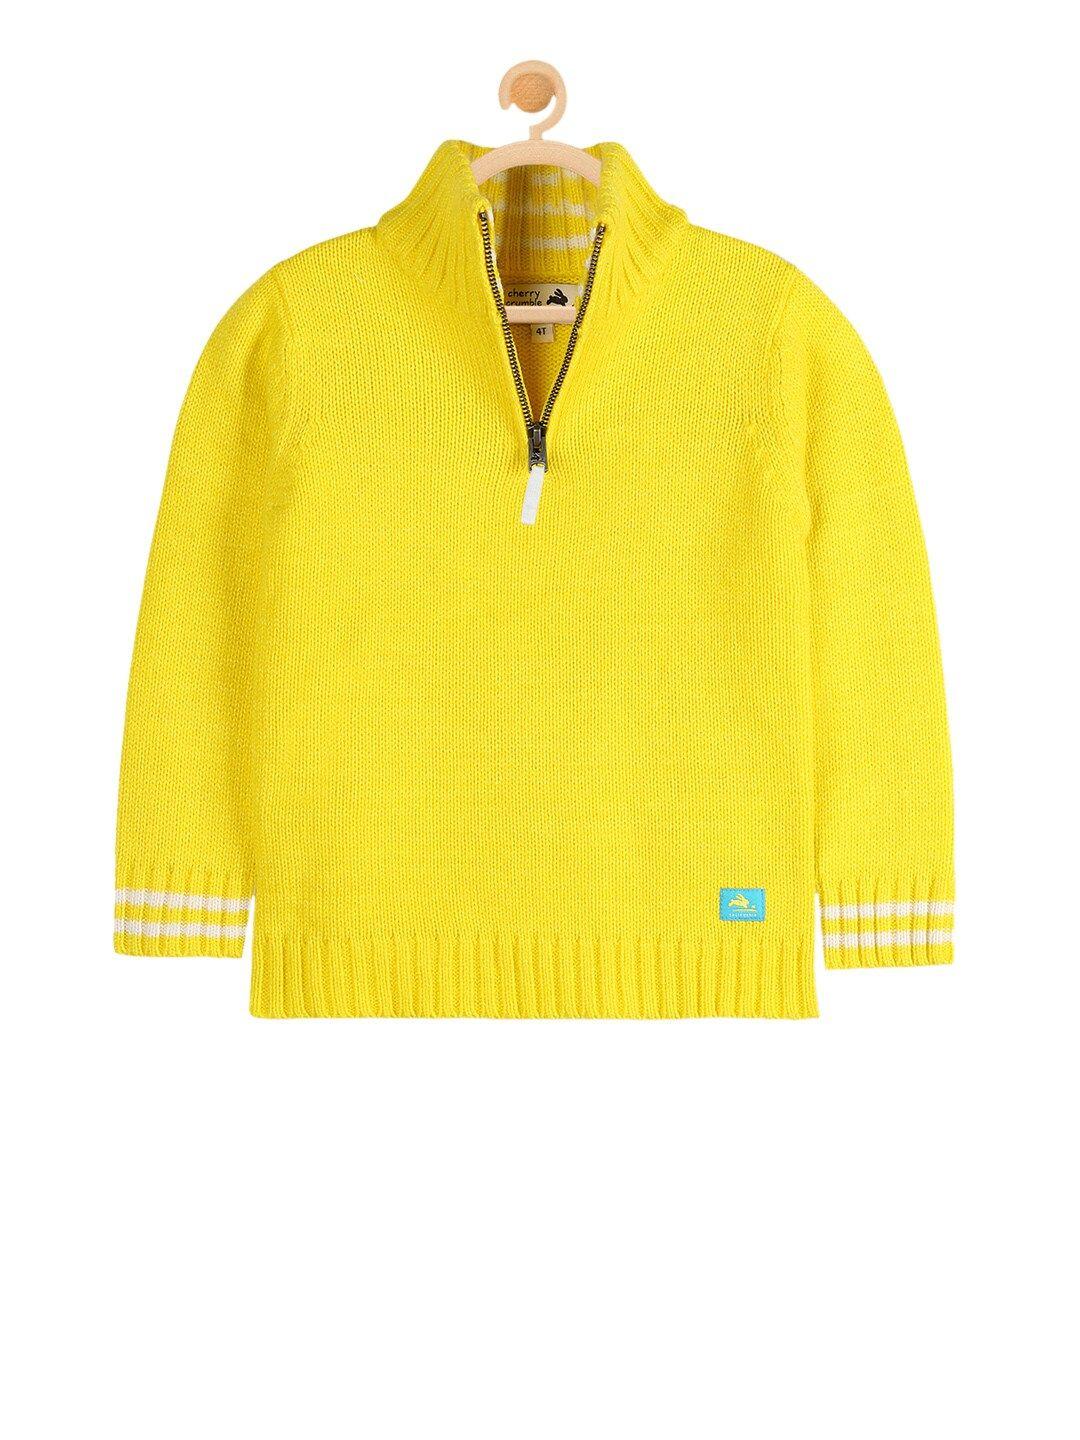 cherry-crumble-boys-yellow-solid-sweater